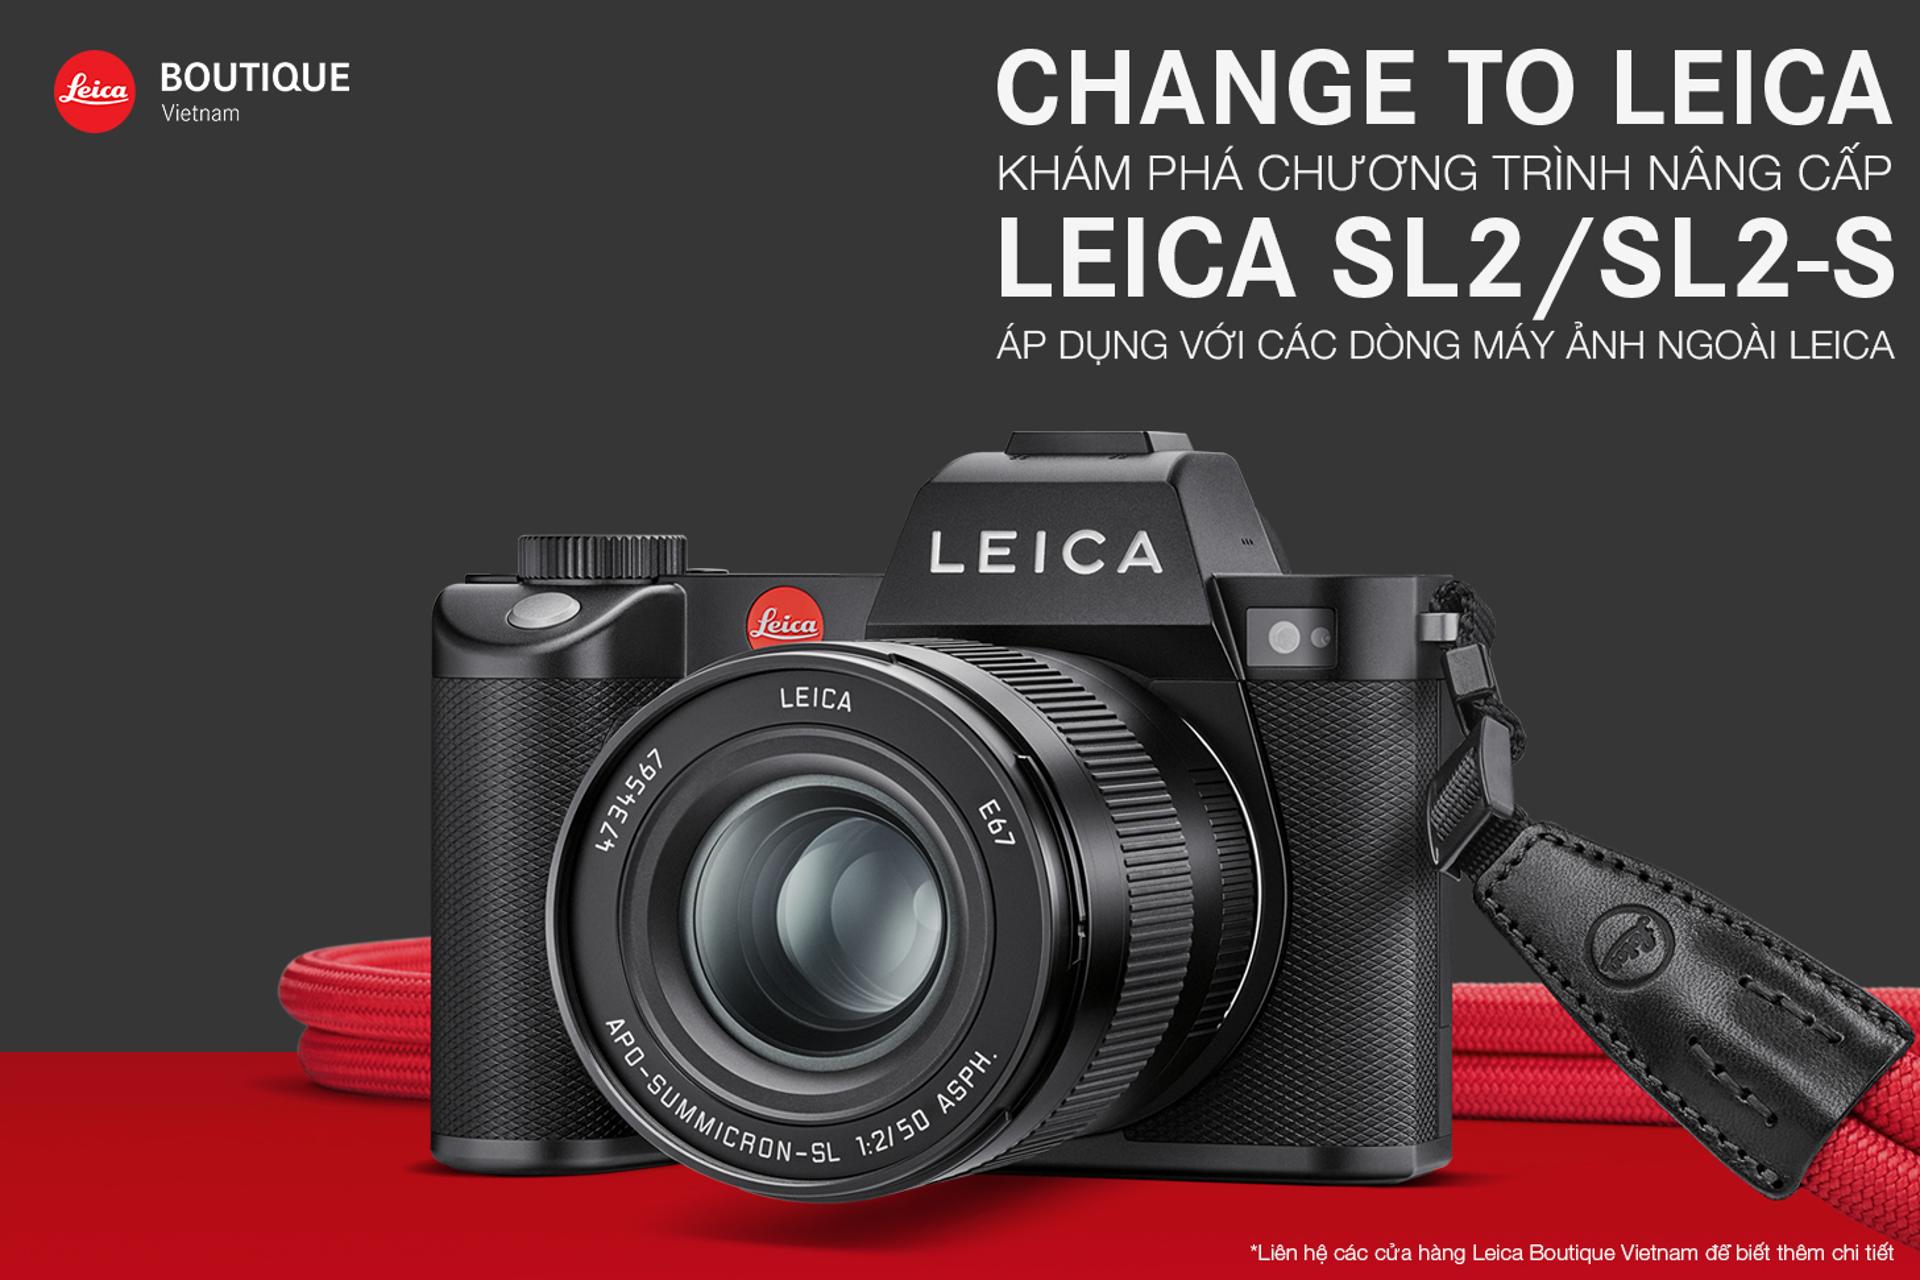 CHANGE TO LEICA | LEICA SL2 TRADE-IN PROMOTION